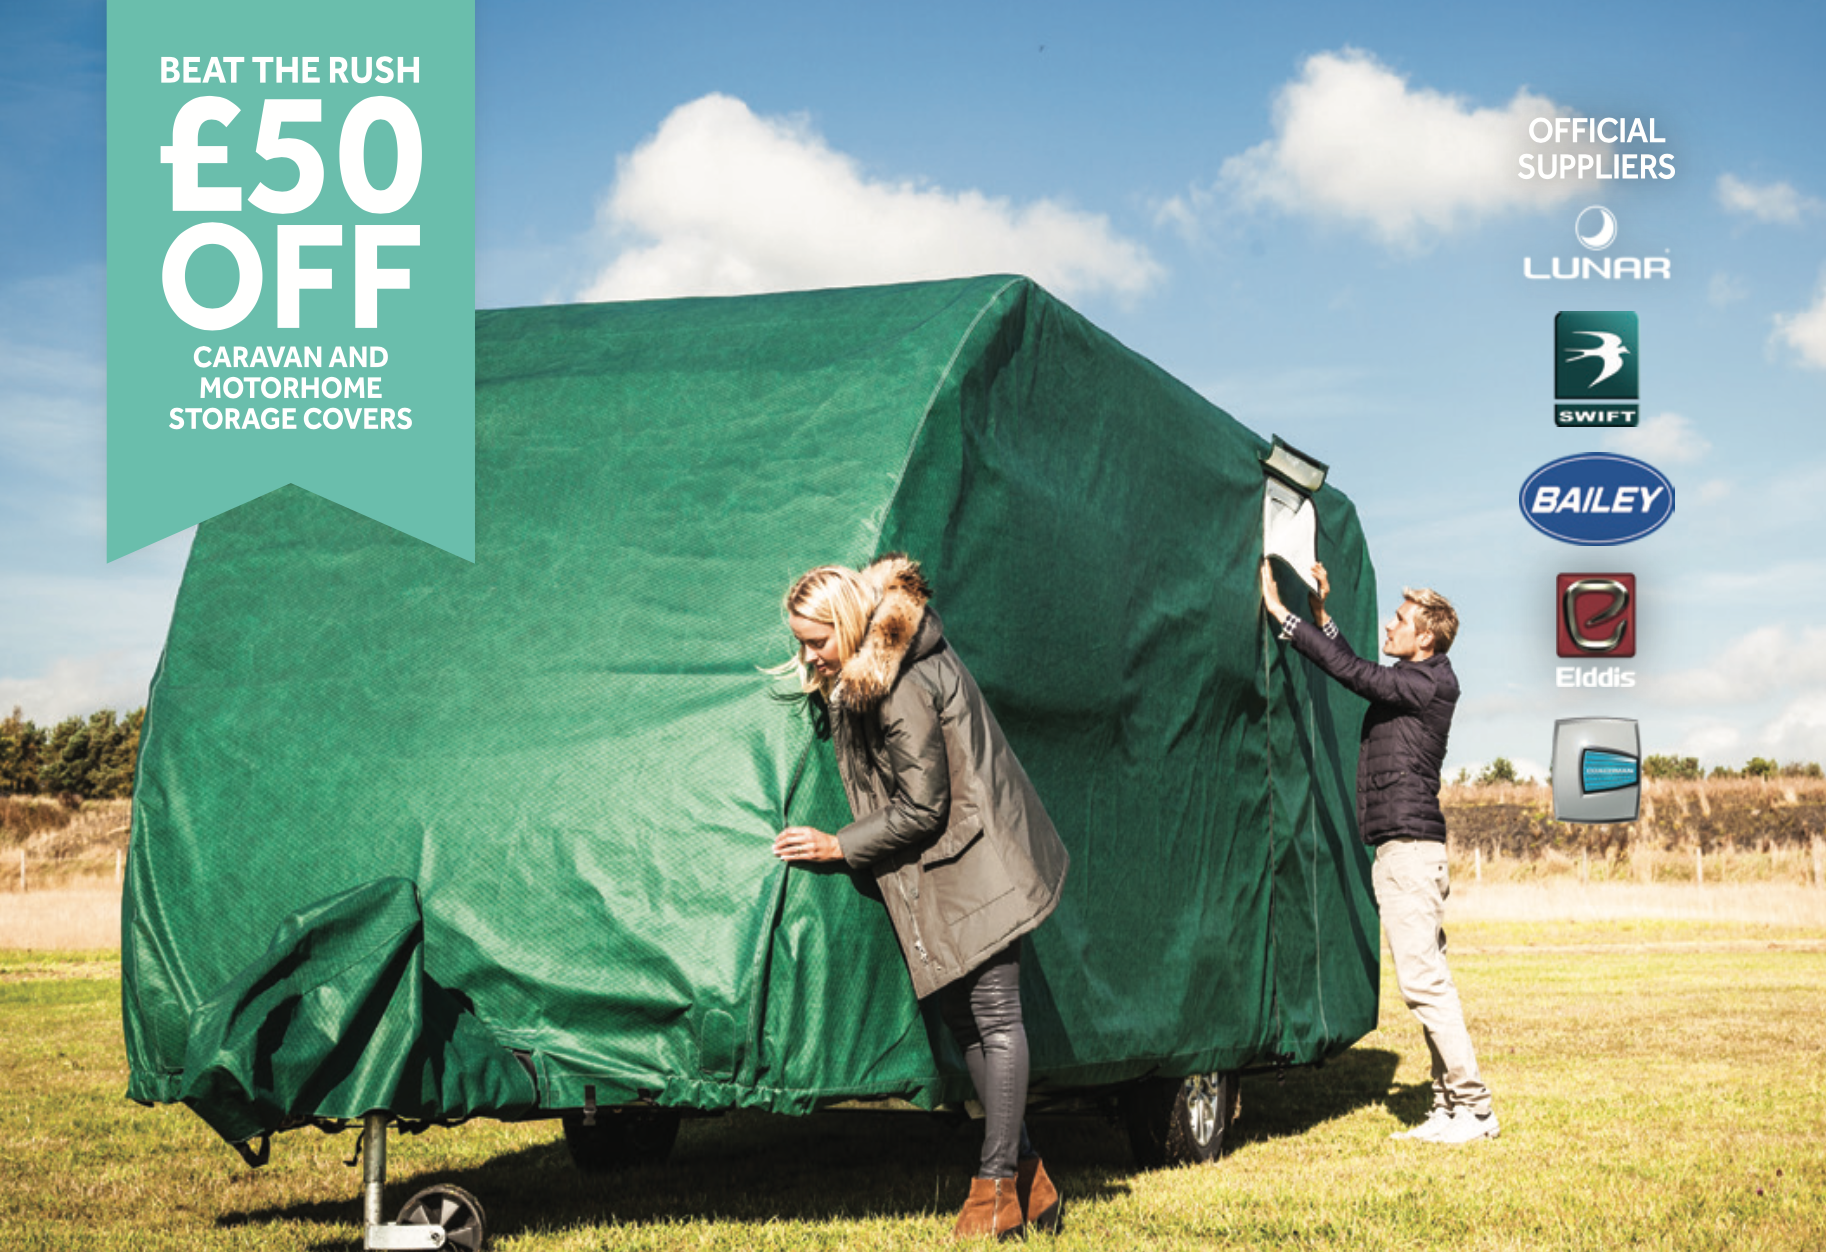 Click to read Save £50 and Beat The Rush this autumn!